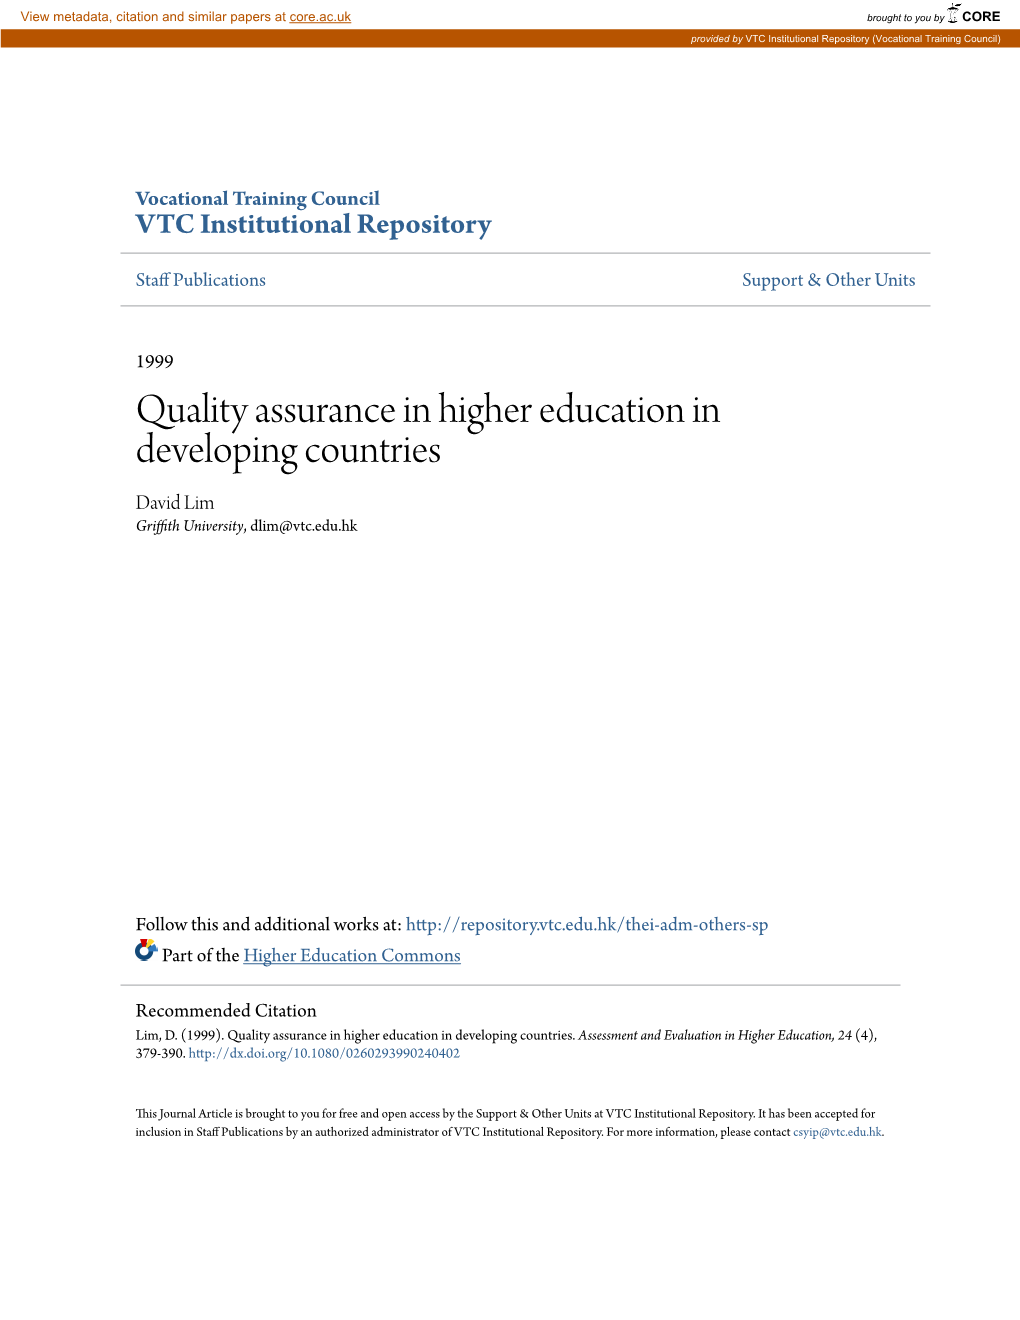 Quality Assurance in Higher Education in Developing Countries David Lim Griffith University, Dlim@Vtc.Edu.Hk